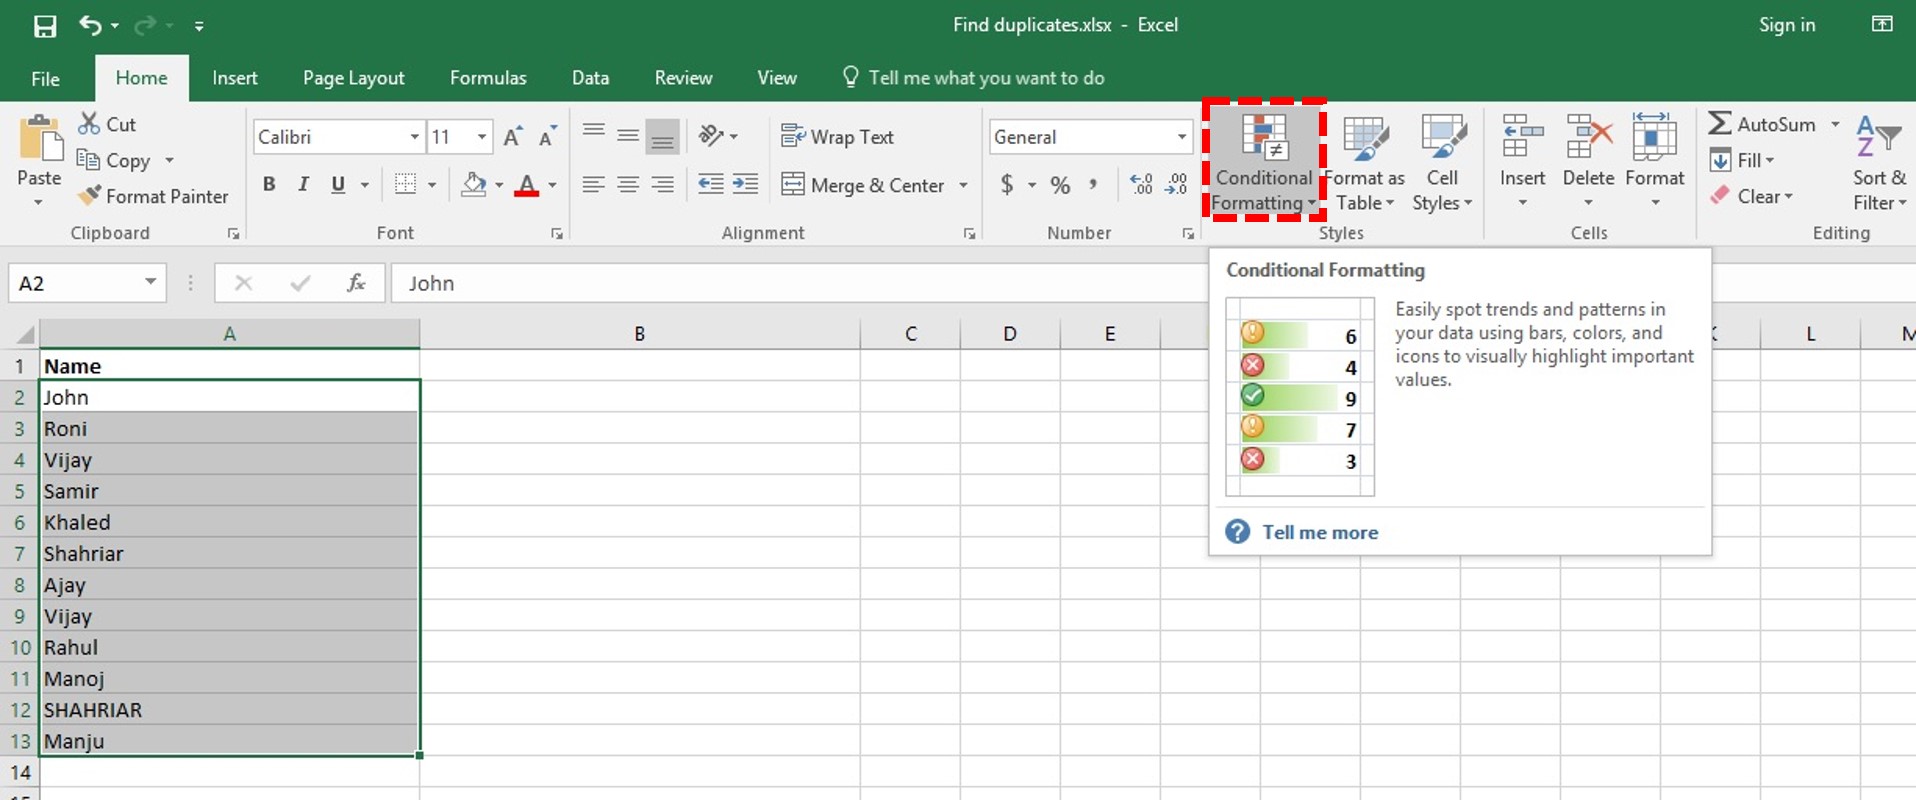 How to find duplicates in excel with simple steps